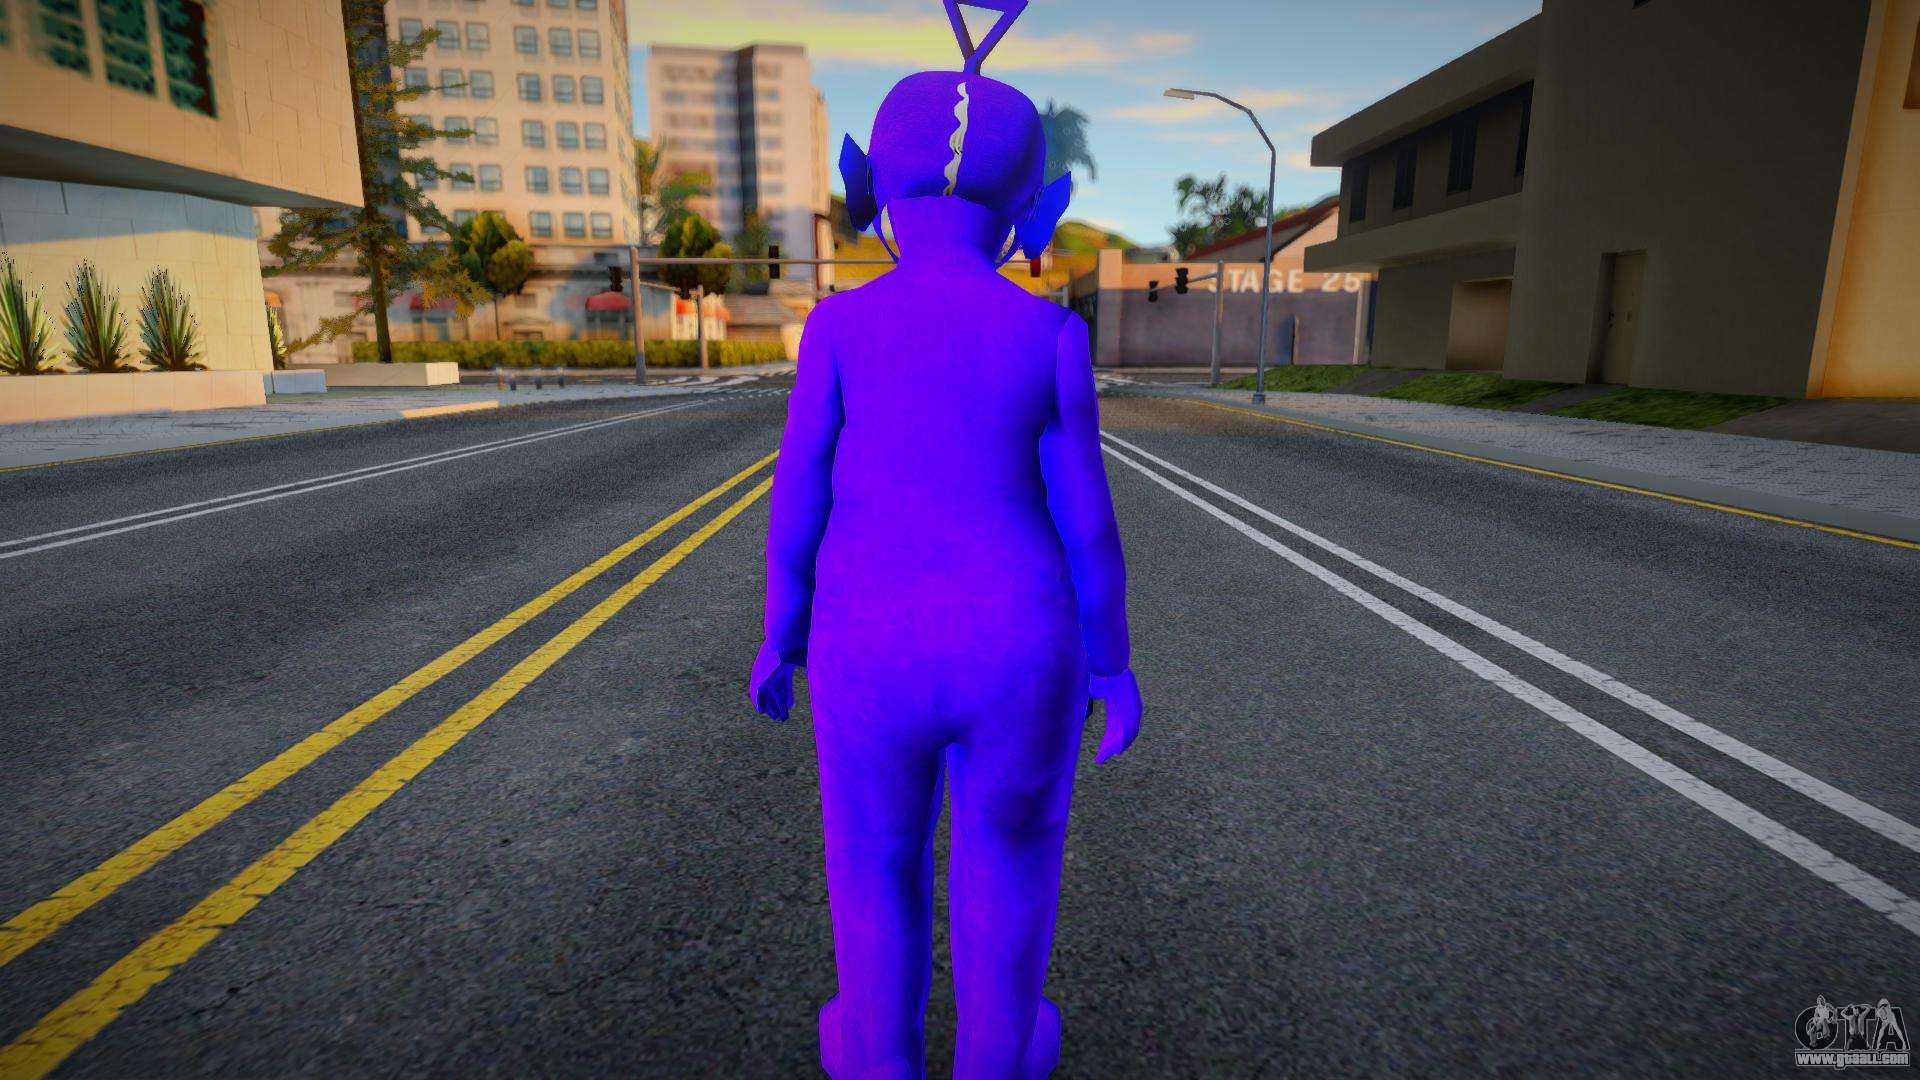 Download Teletubby from the game Slendytubbies for GTA San Andreas